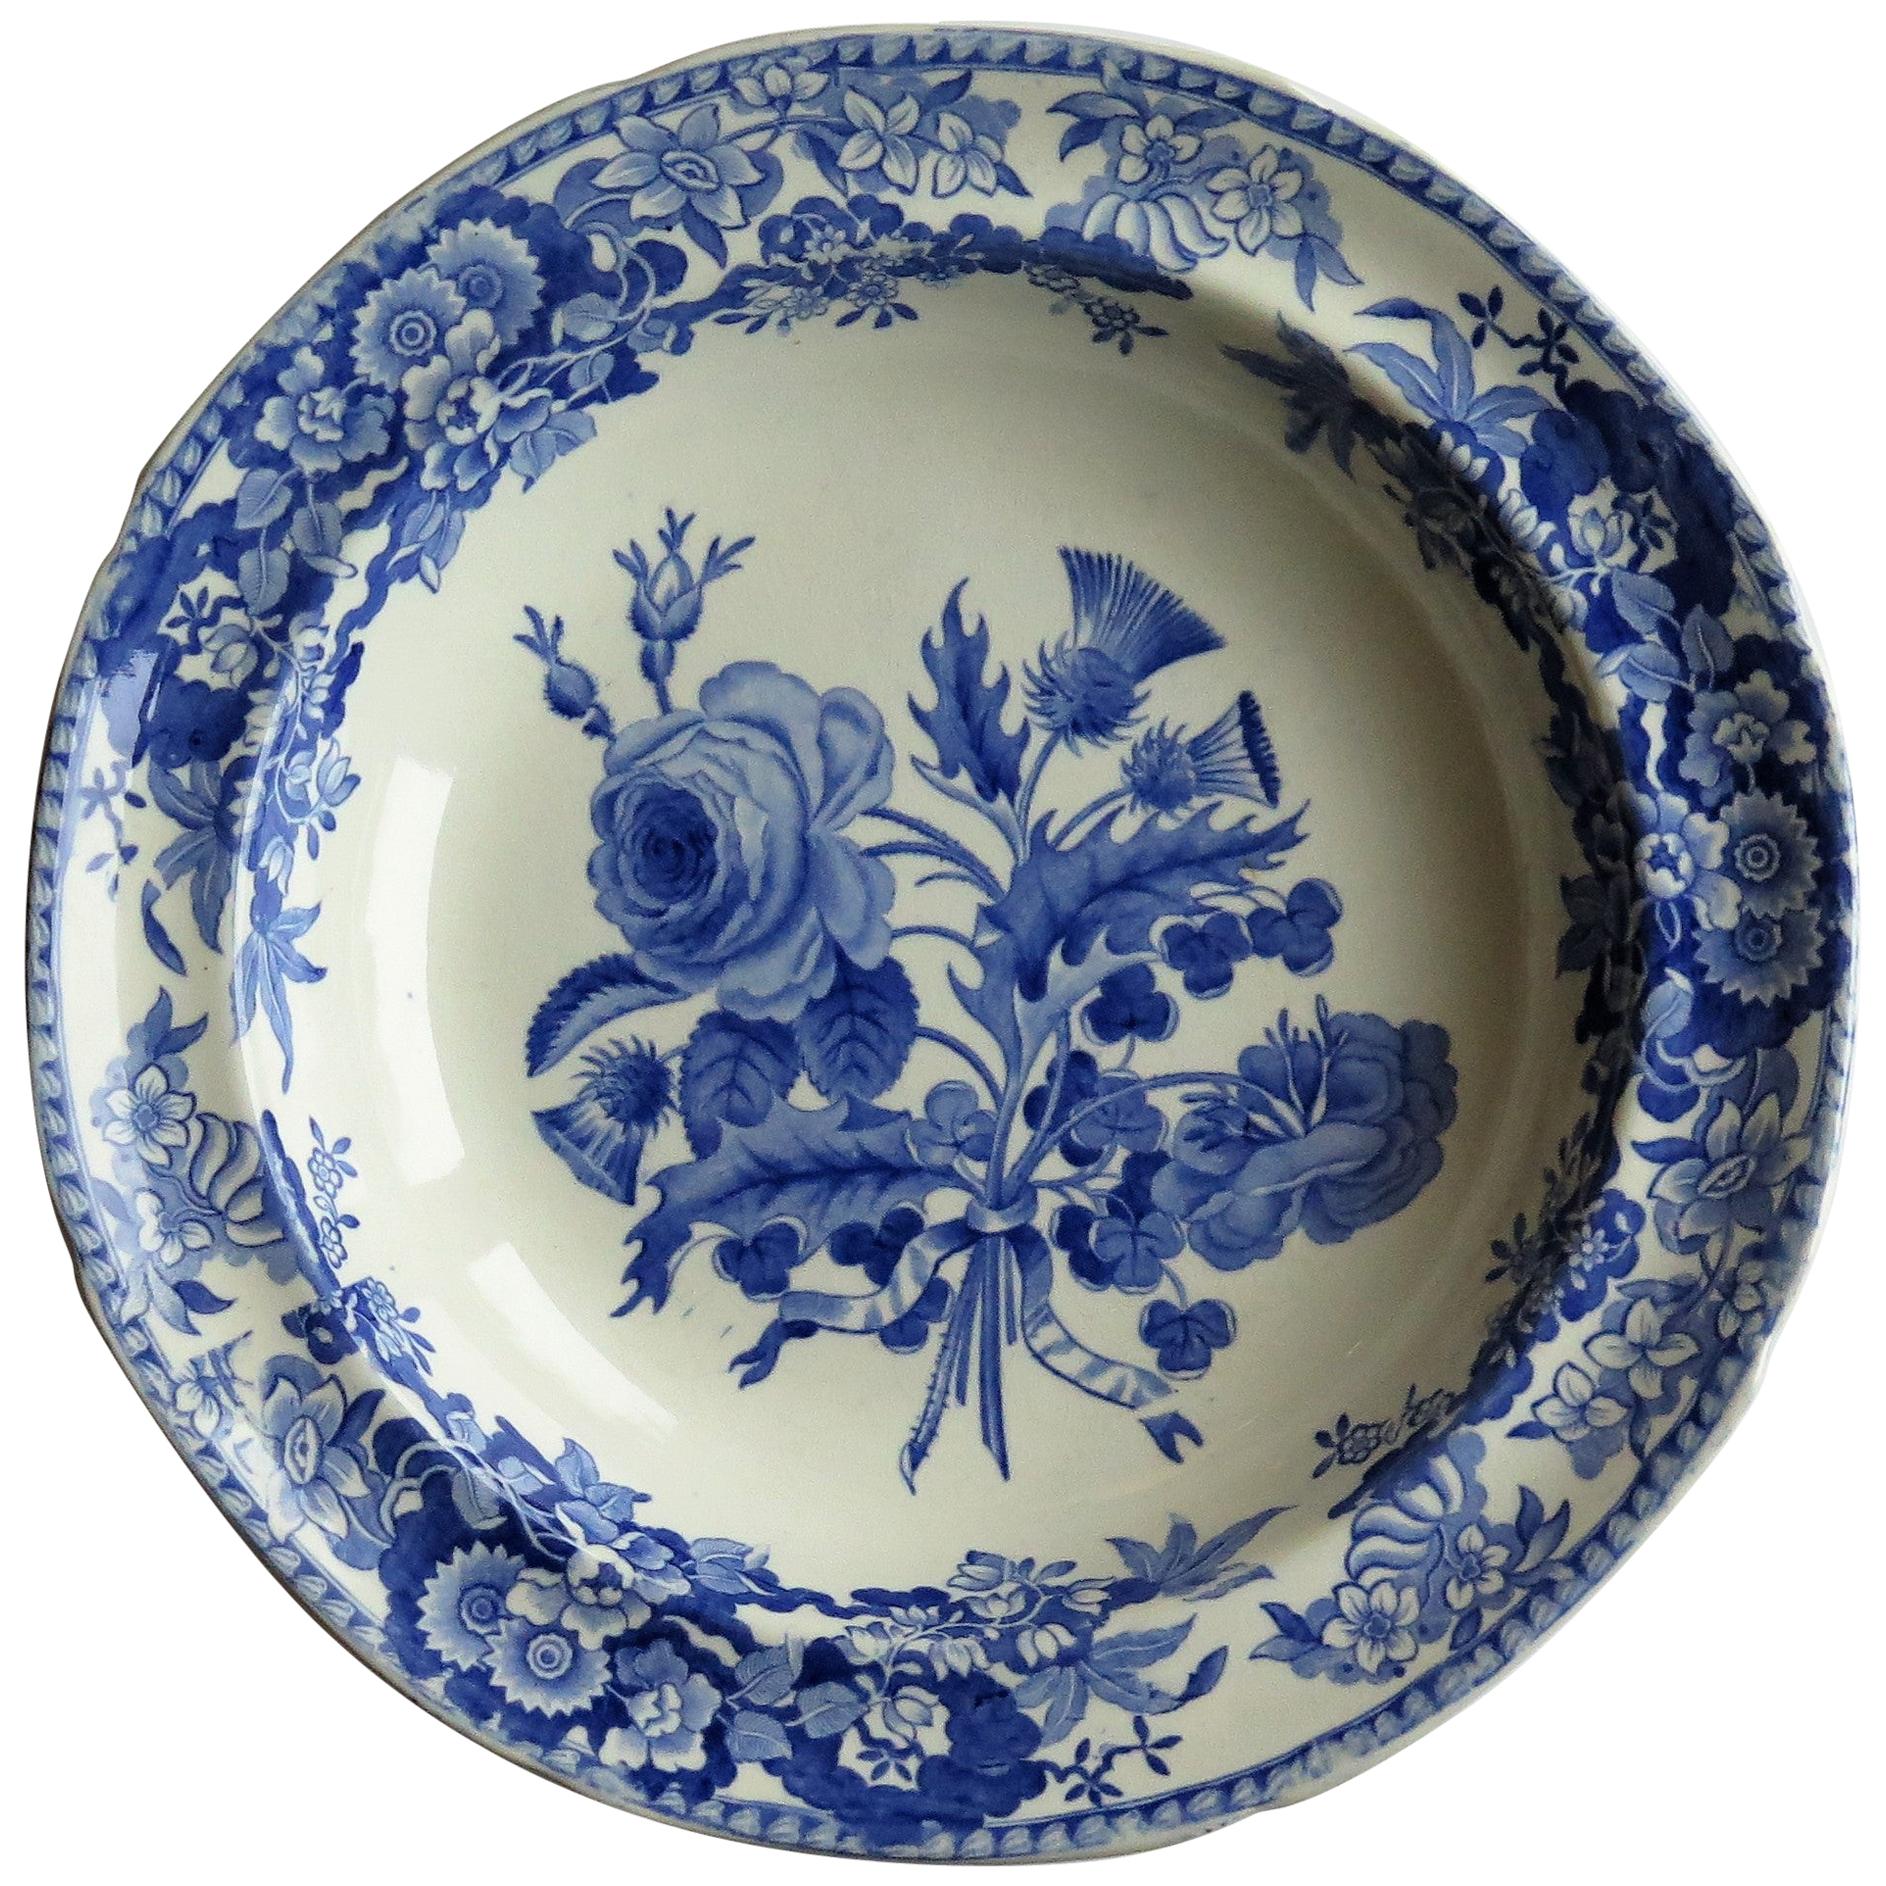 Georgian Plate or Bowl by Spode in Blue and White Union Wreath Ptn No.3, Ca 1820